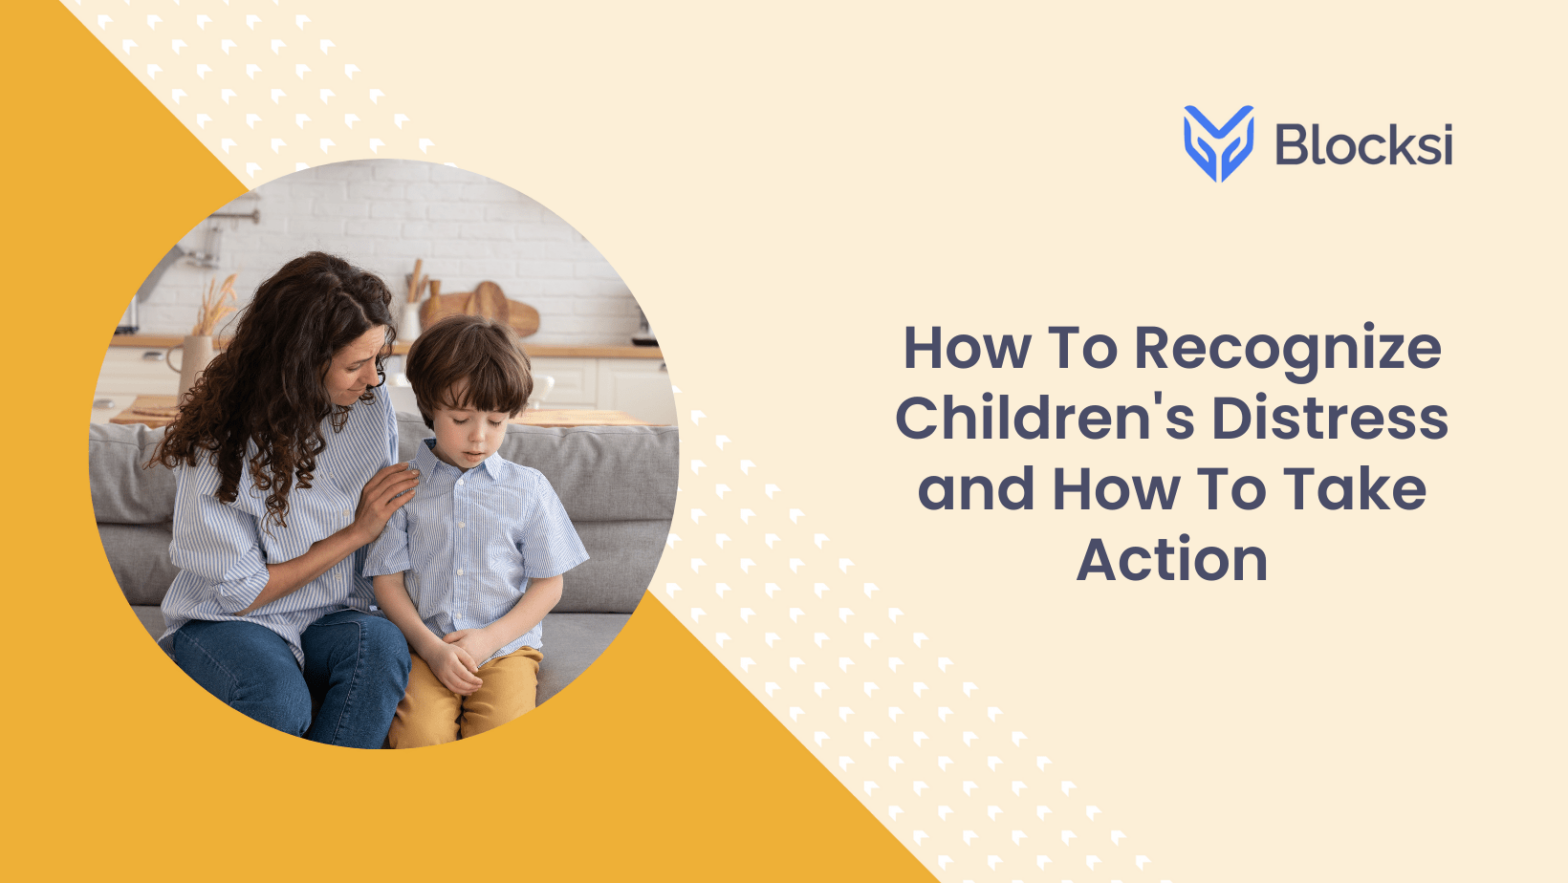 How To Recognize Children’s Distress and How To Take Action